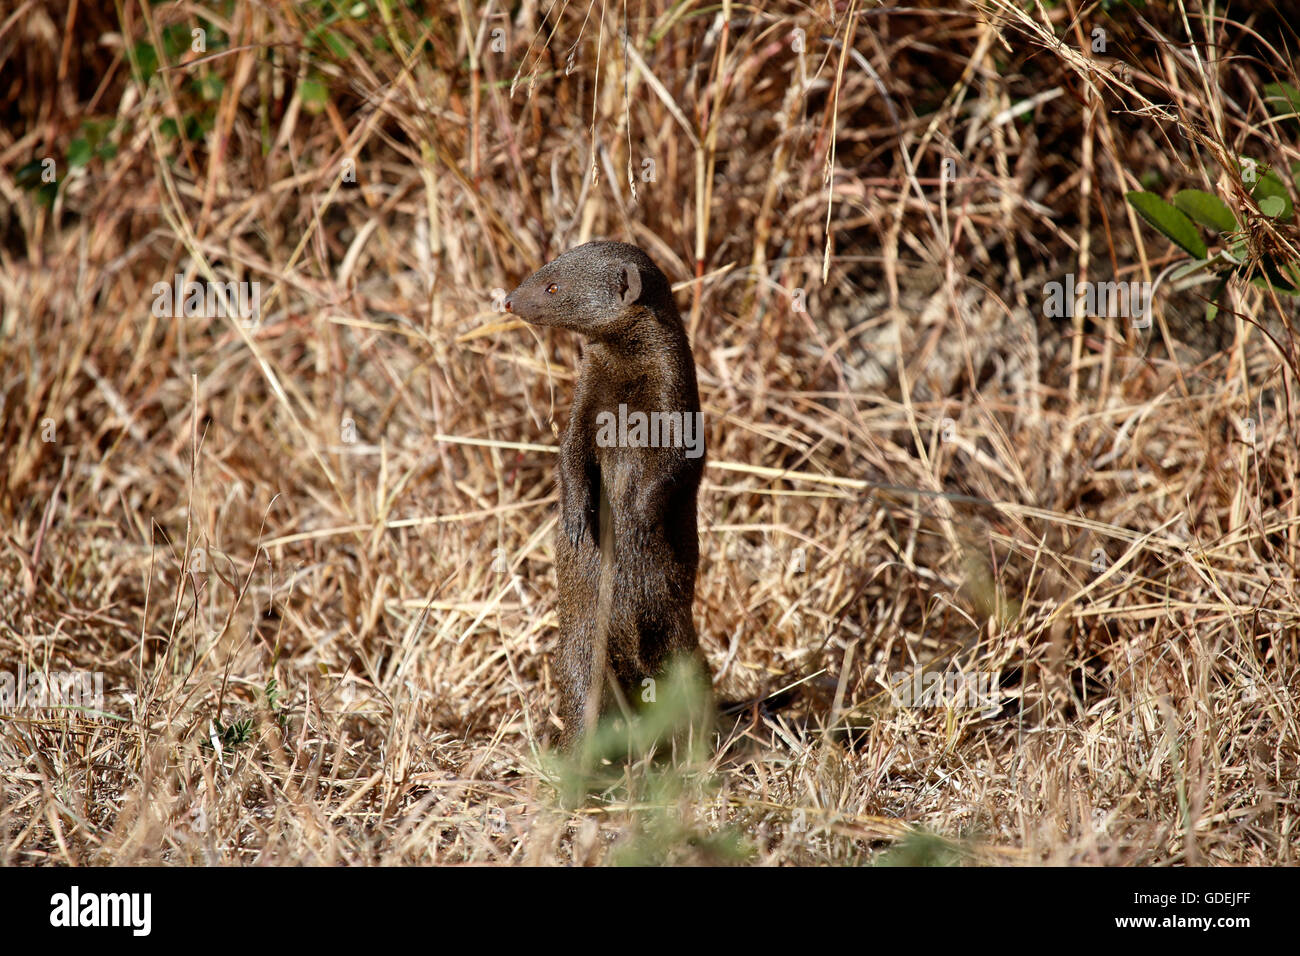 Portrait of a brown mongoose standing up, Kruger National Park, South Africa Stock Photo